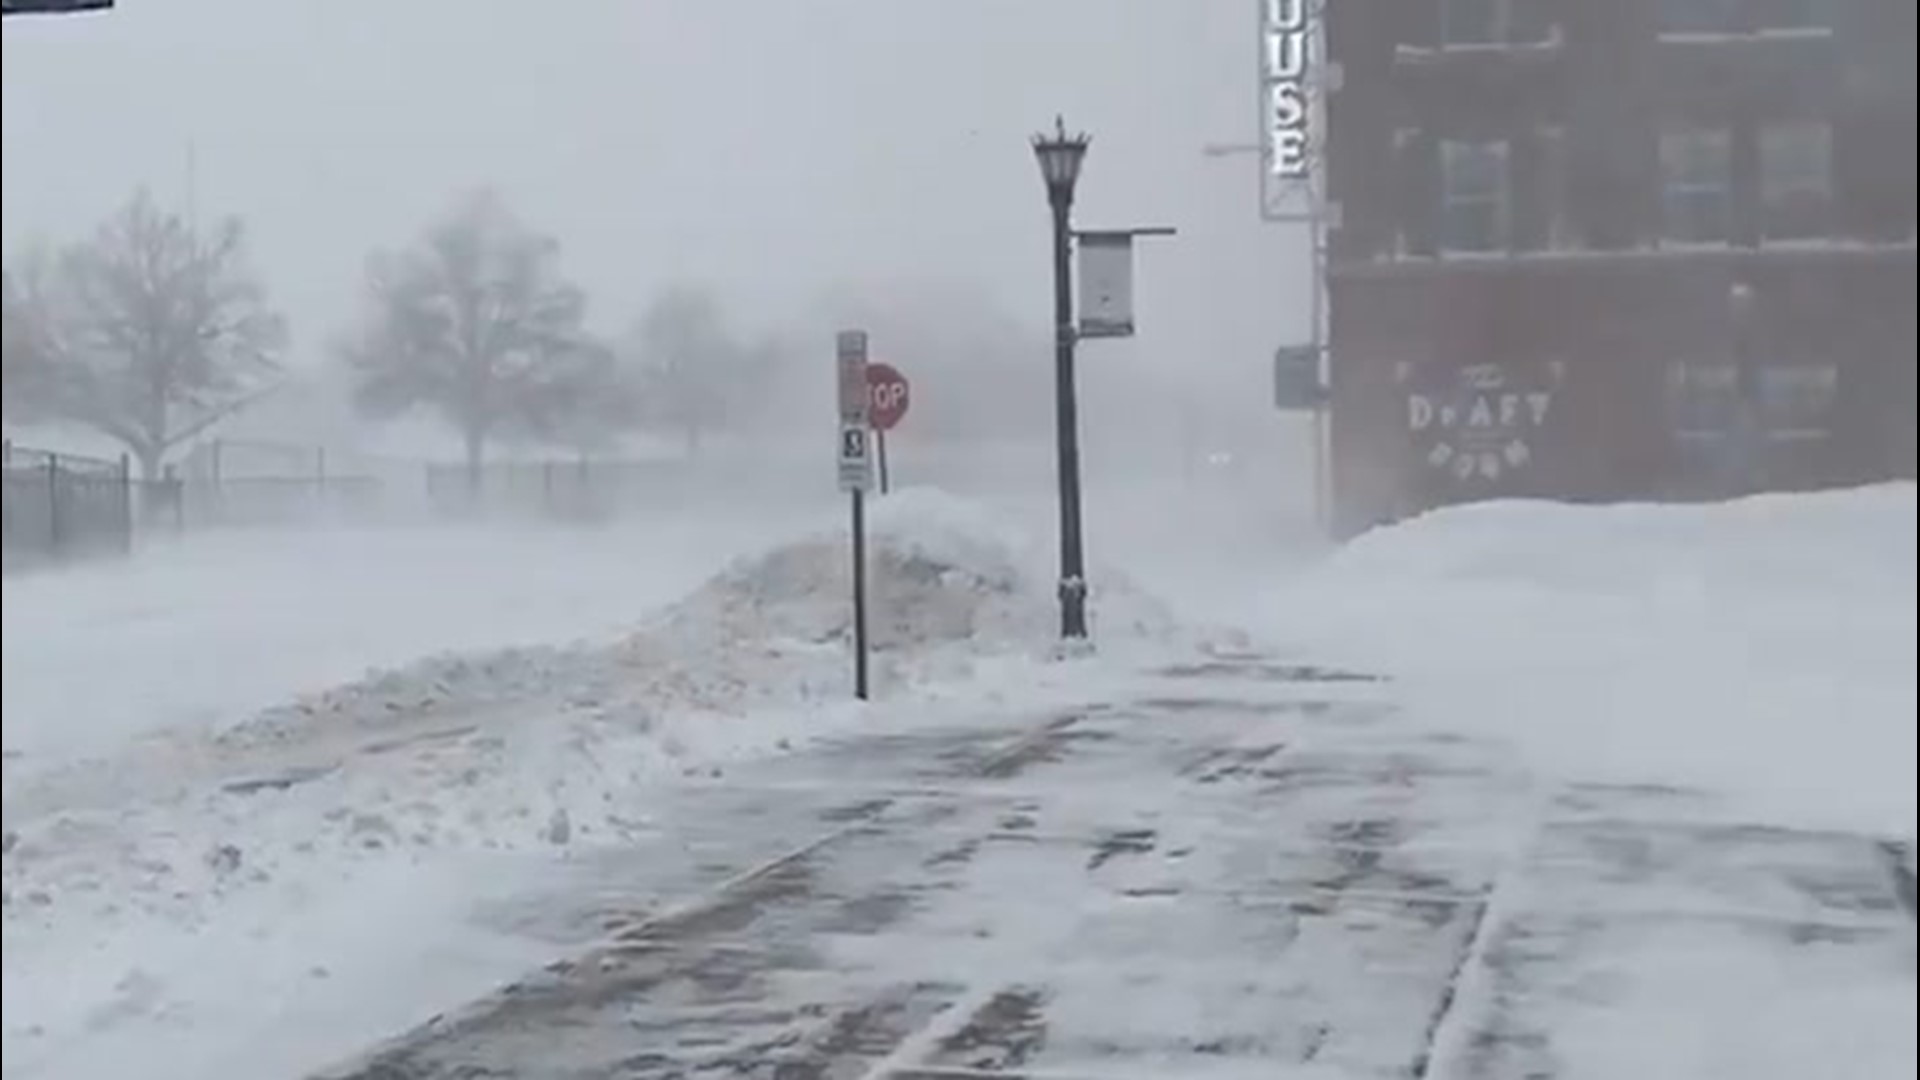 A heavy snowstorm blew through Buffalo, New York, on Dec. 26, covering the ground and creating slick roads.